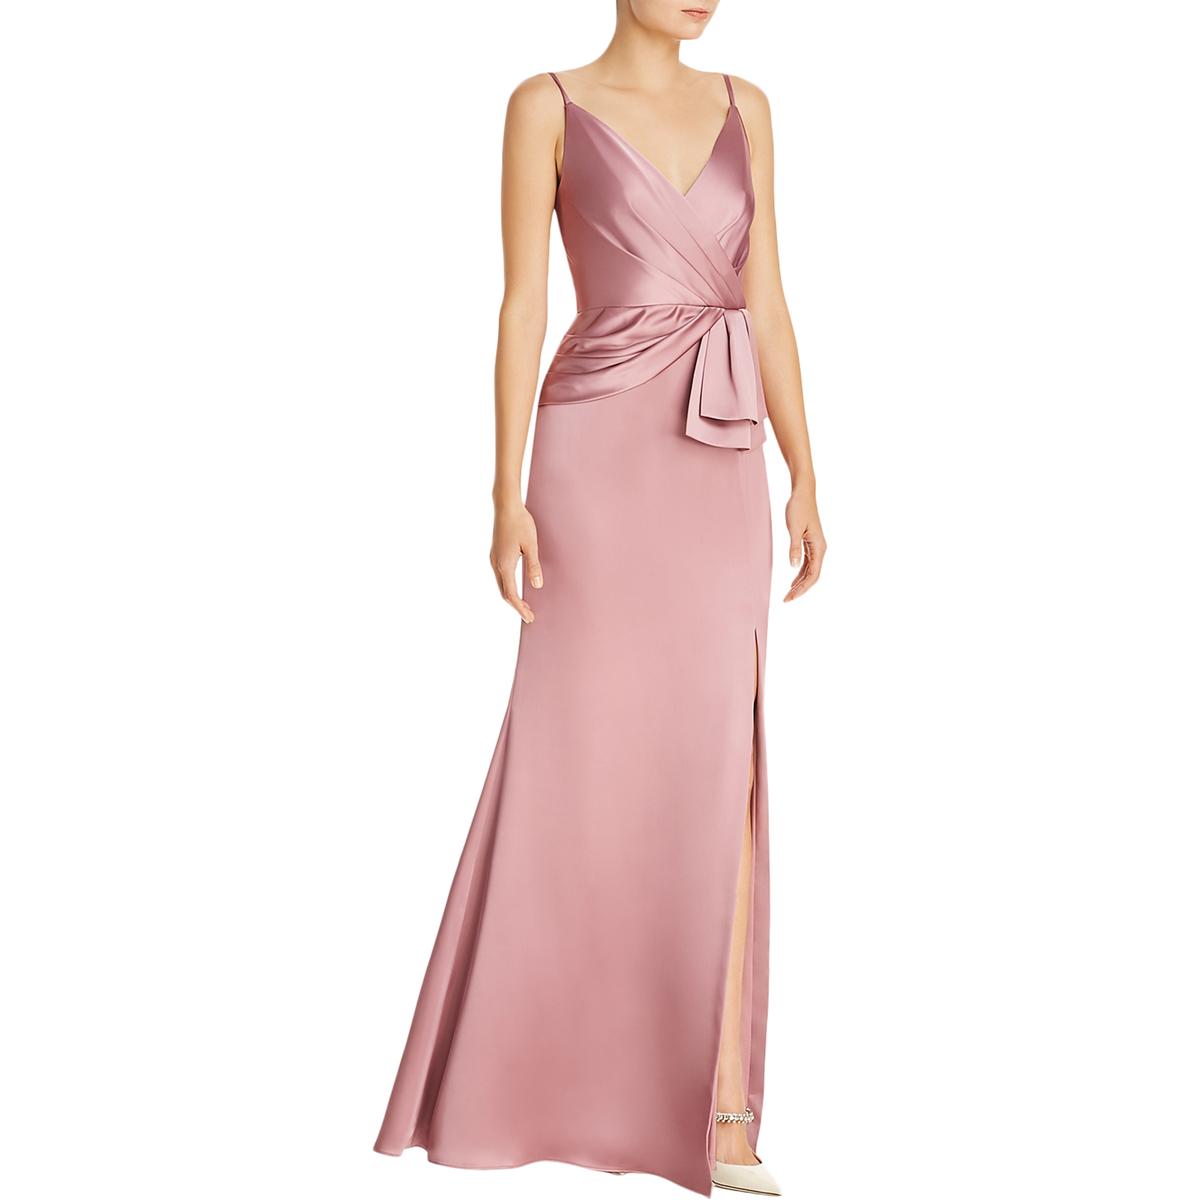 Adrianna Papell Womens Pink Satin Formal Evening Wrap Dress Gown 12 ...